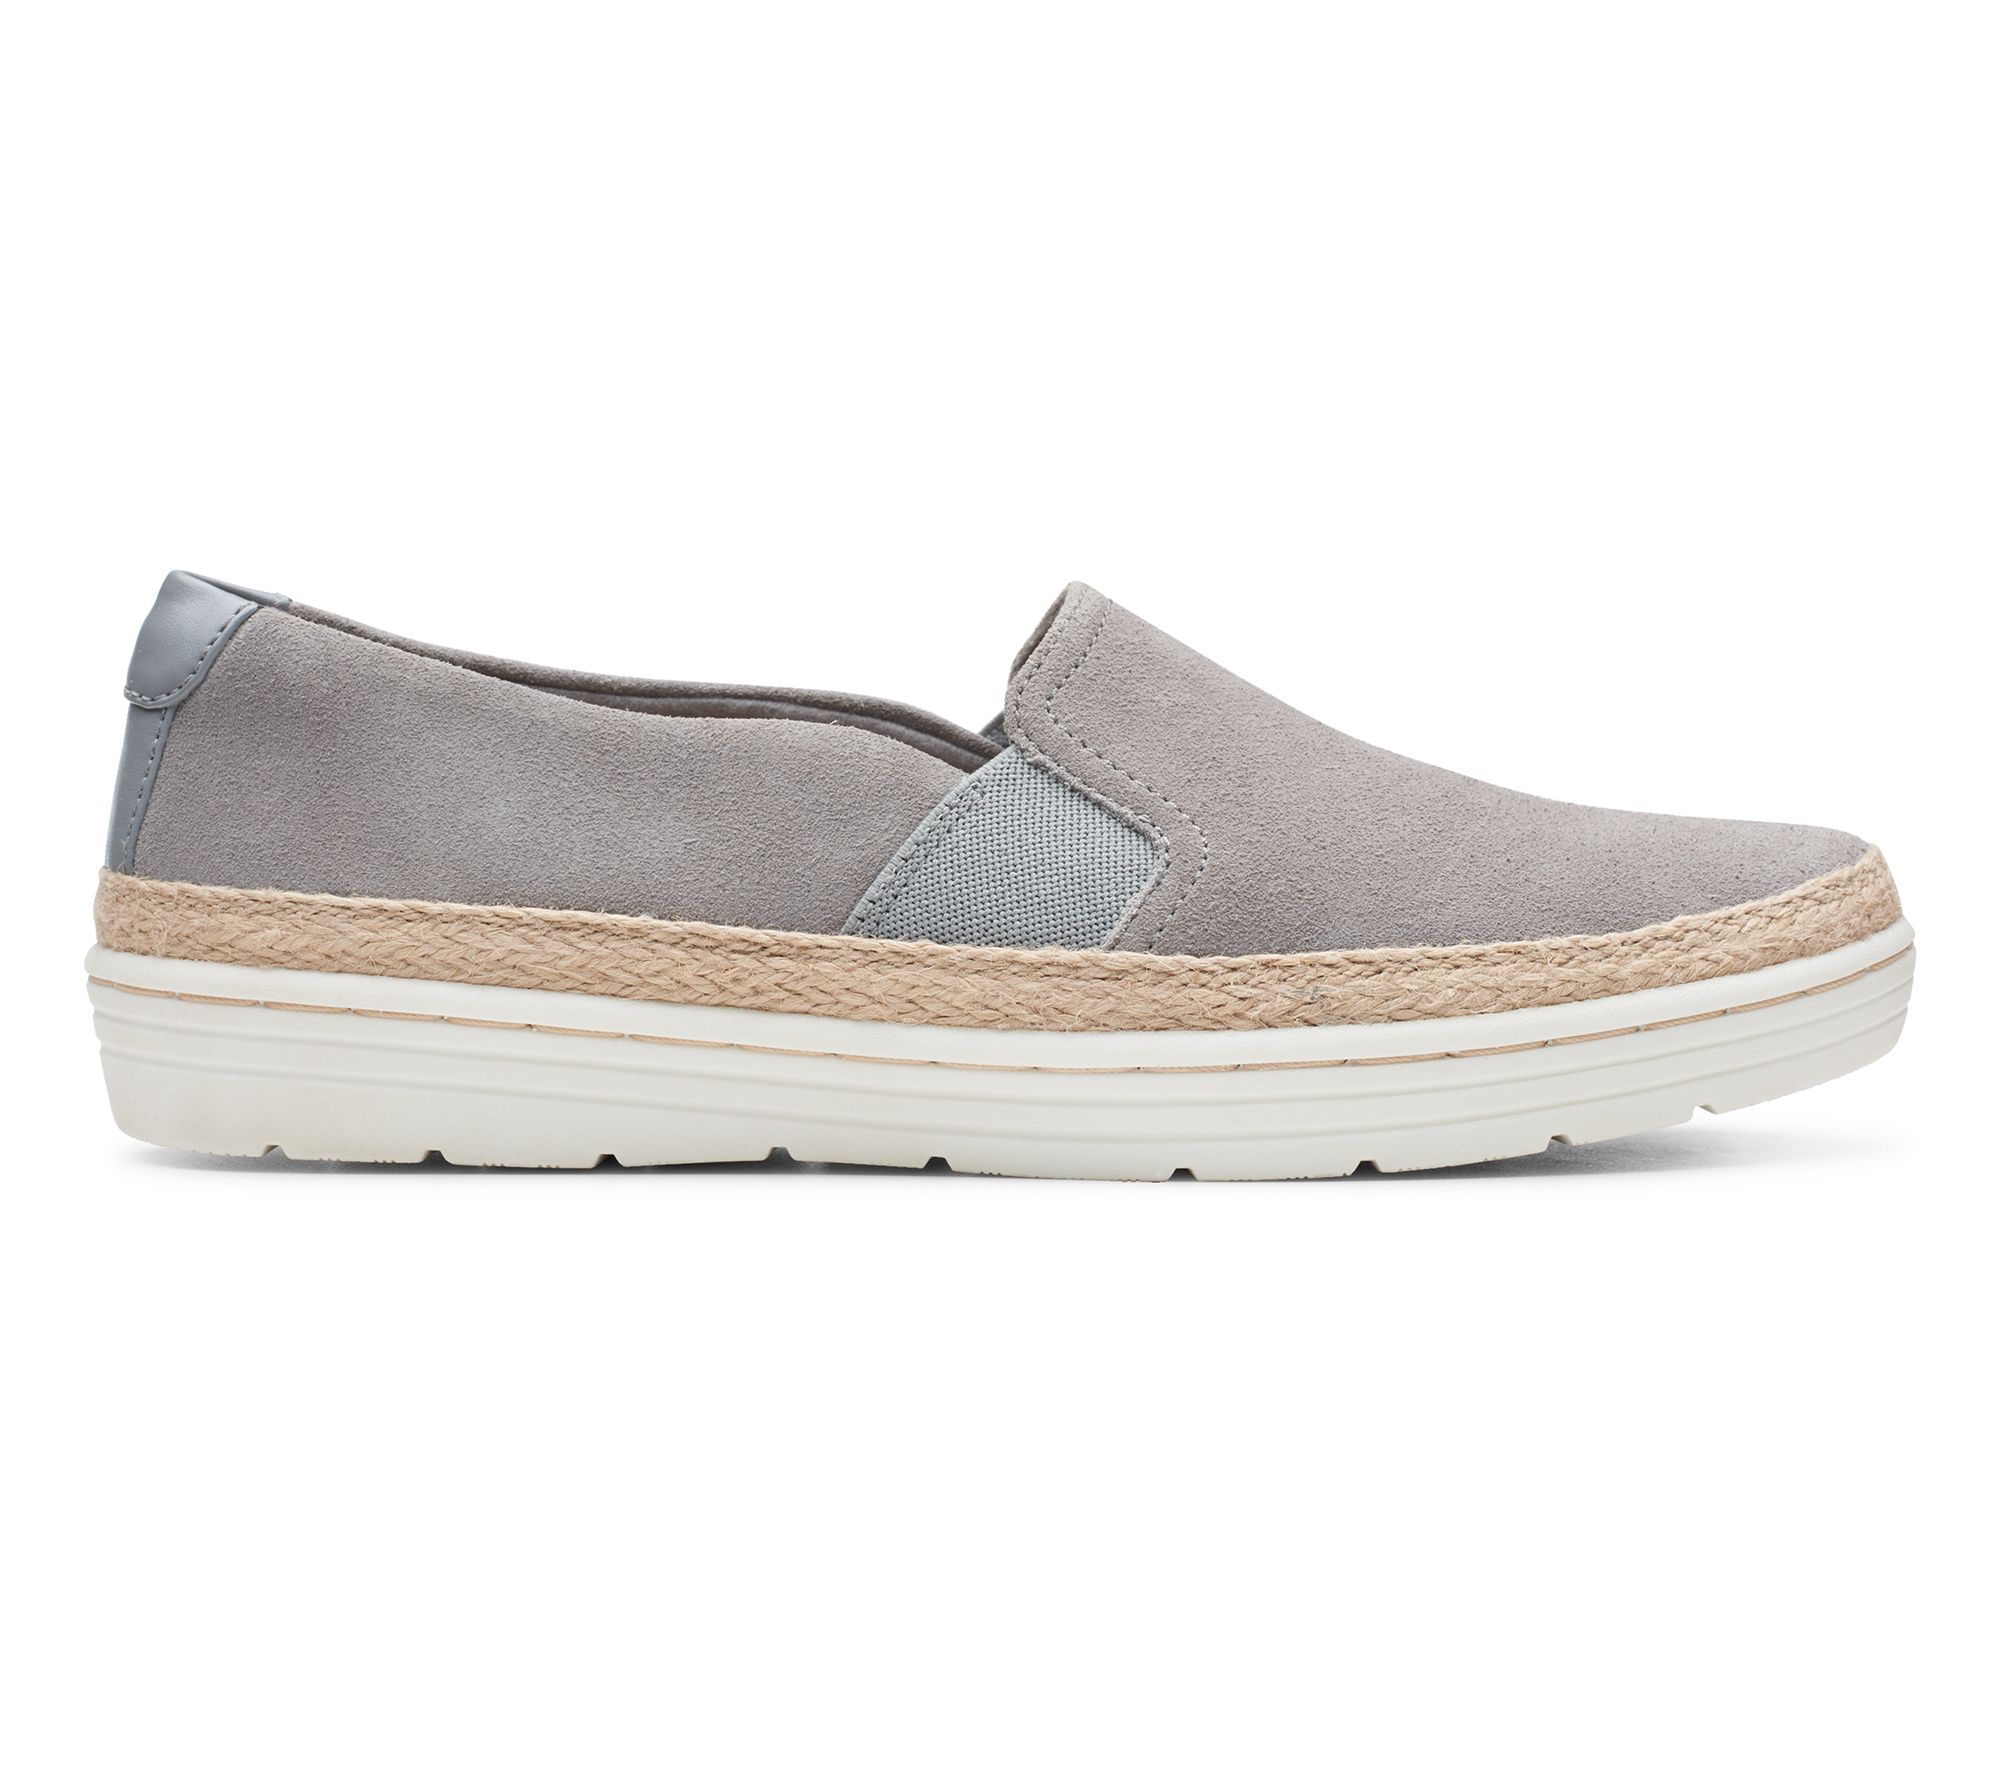 qvc clarks boat shoes